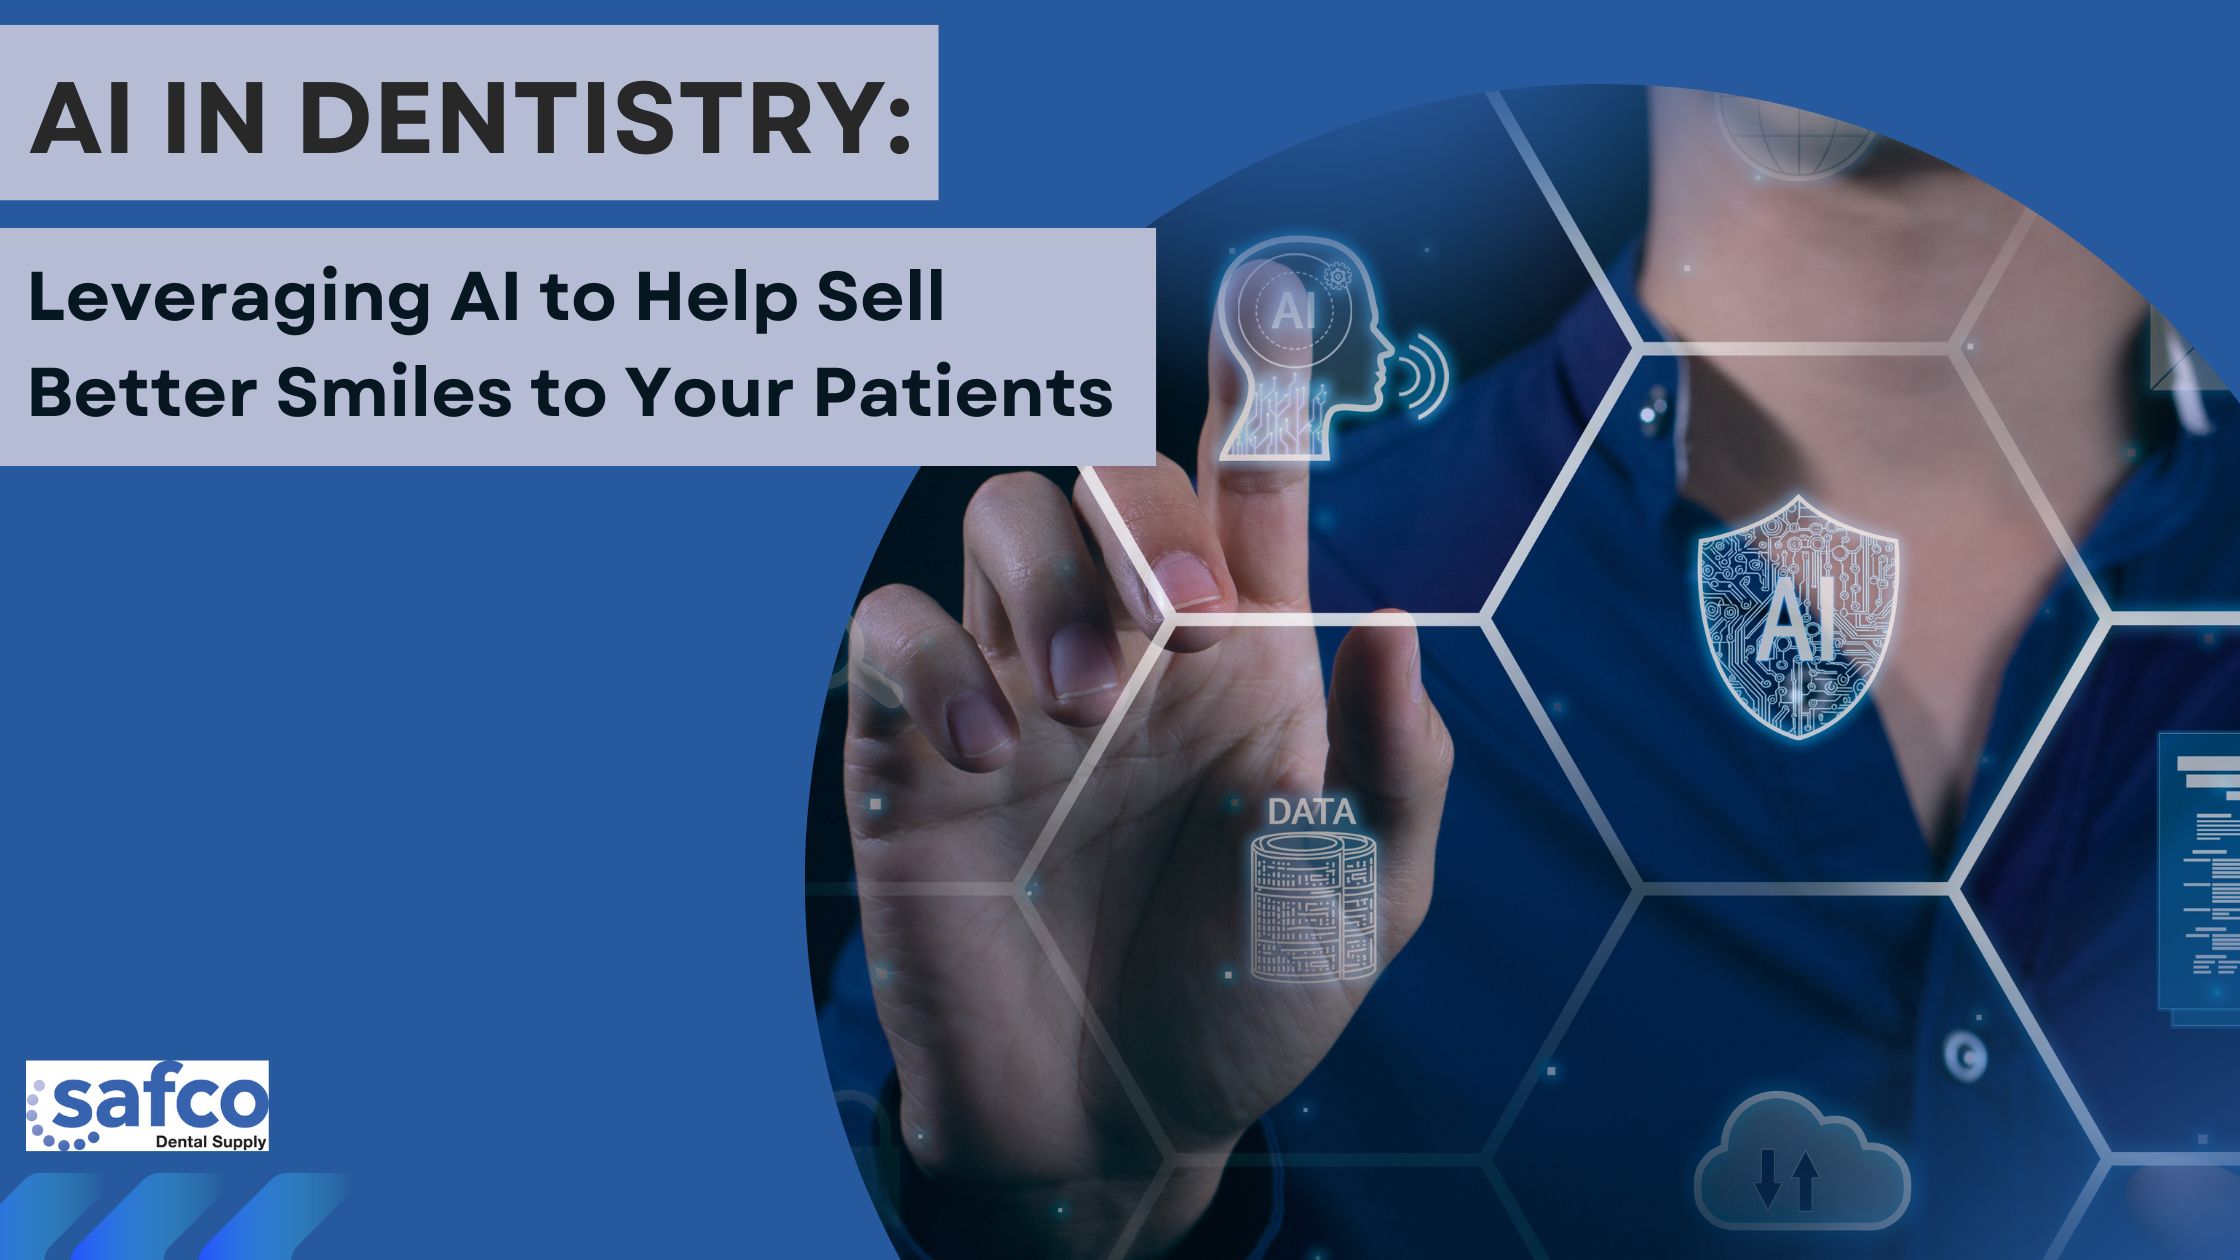 AI in Dentistry: Leveraging AI to Help Sell Better Smiles to Your Patients